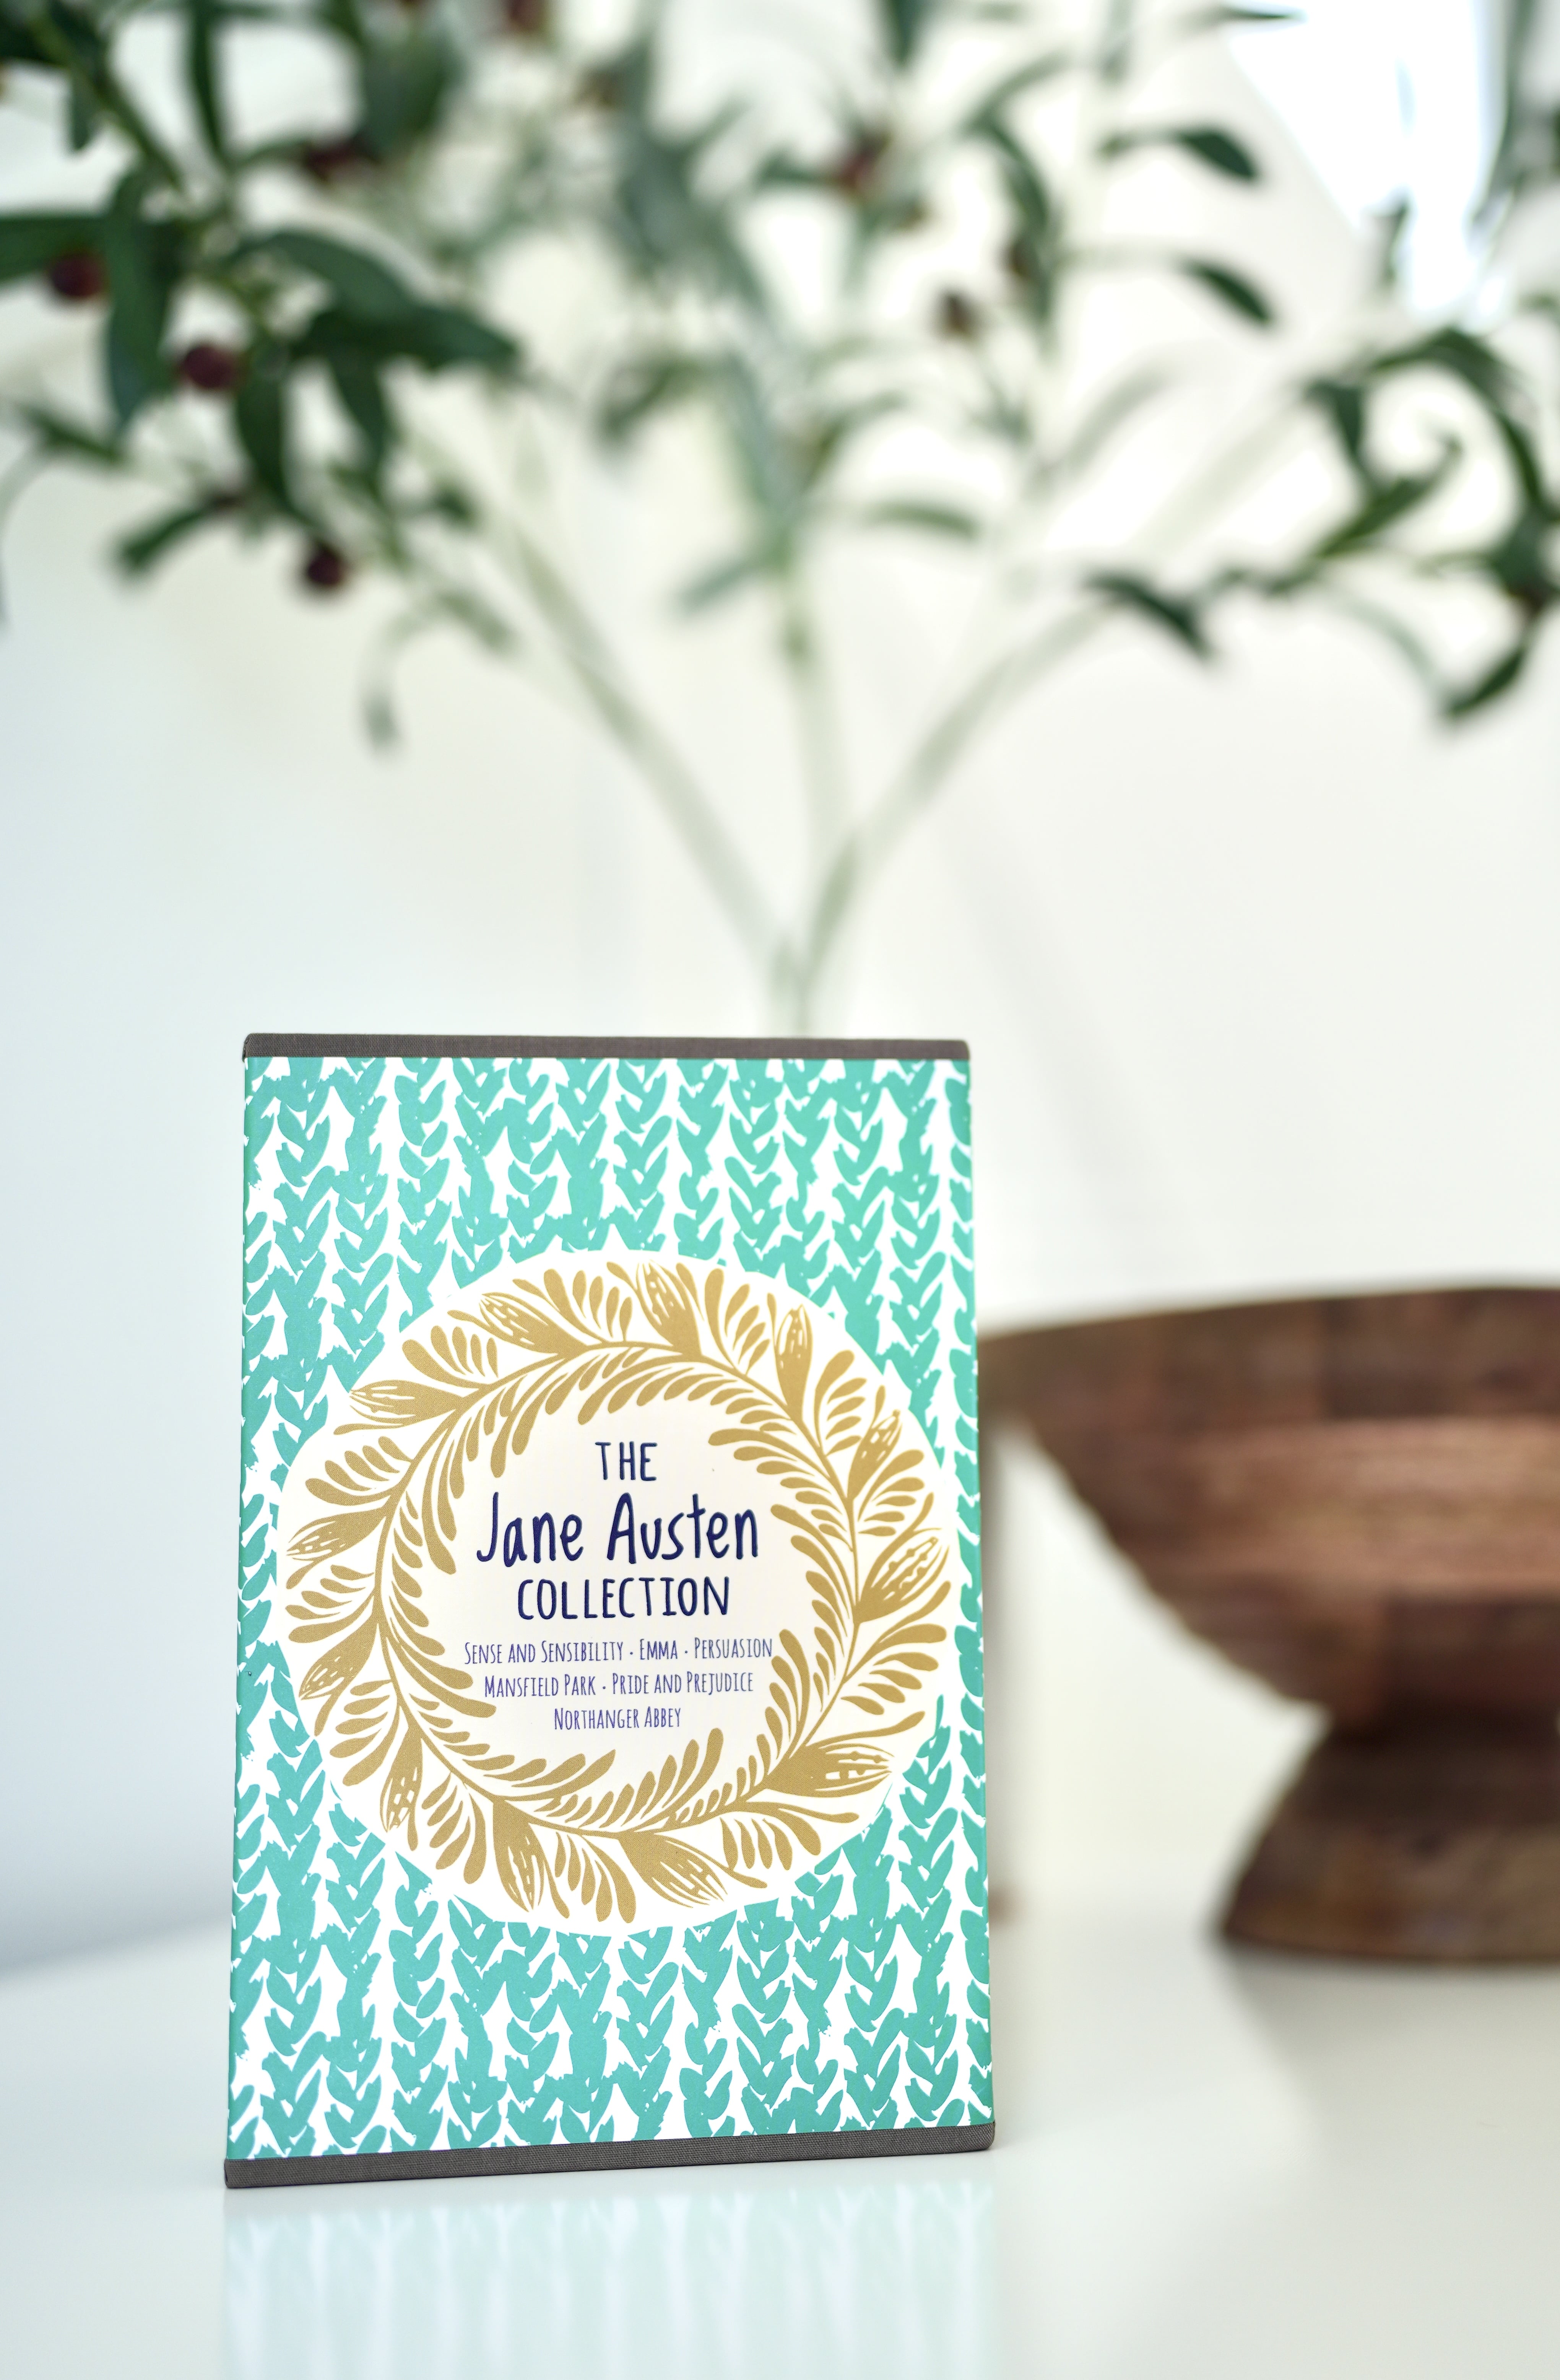 Front photo of a boxed book set collection of Jane Austen Novels. Text on cover reads "The Jane Austen Collection". Set on white background next to brown decorative bowl.